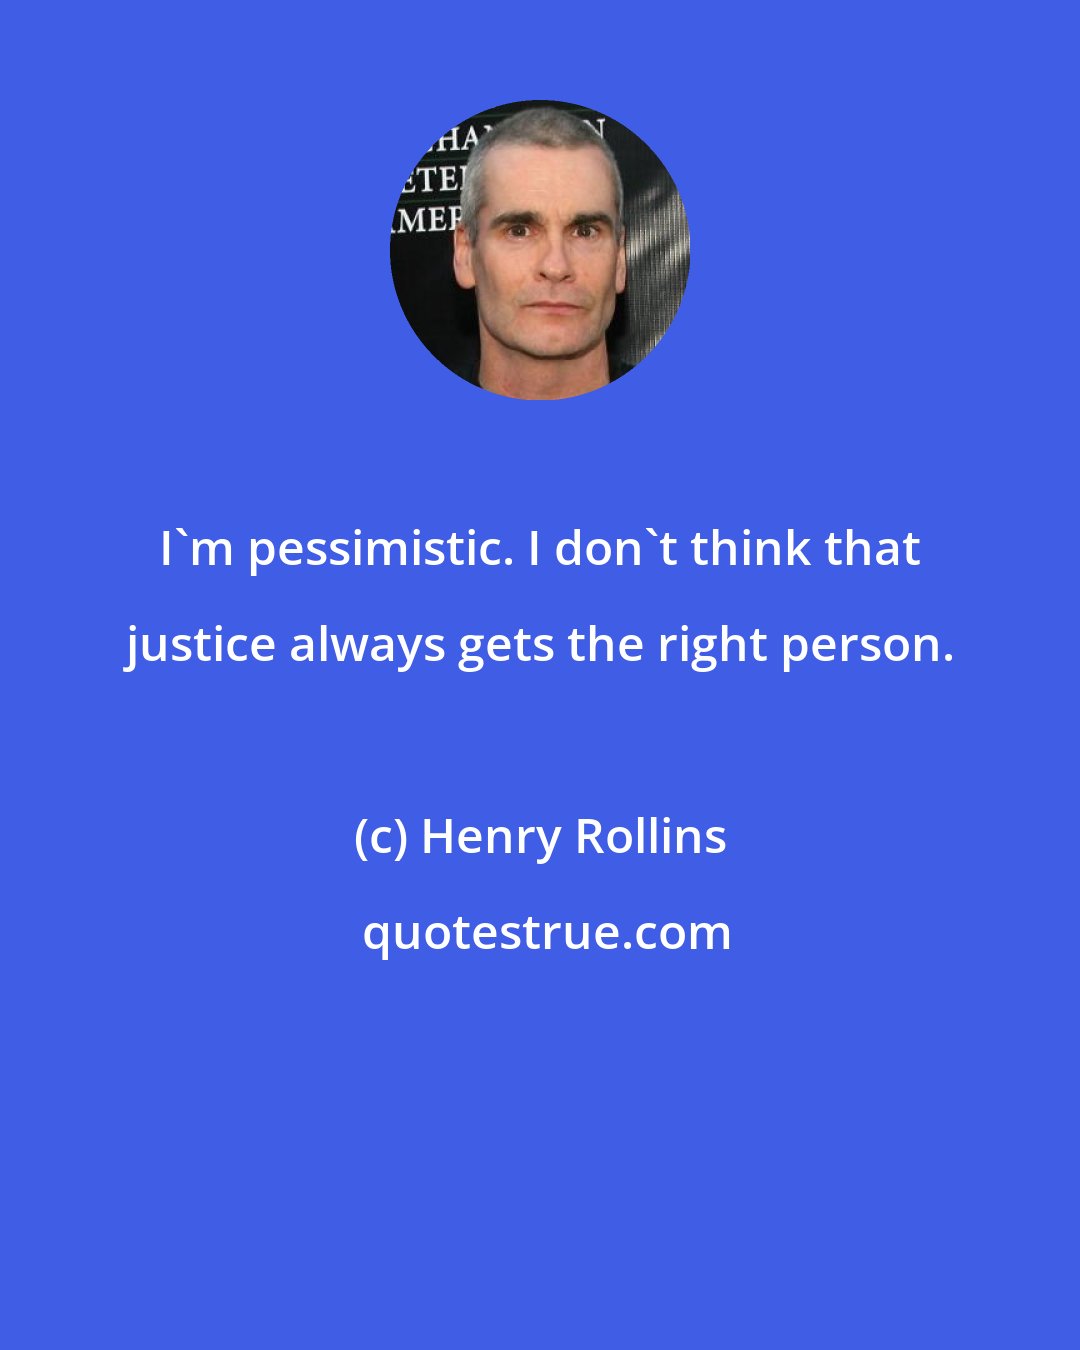 Henry Rollins: I'm pessimistic. I don't think that justice always gets the right person.